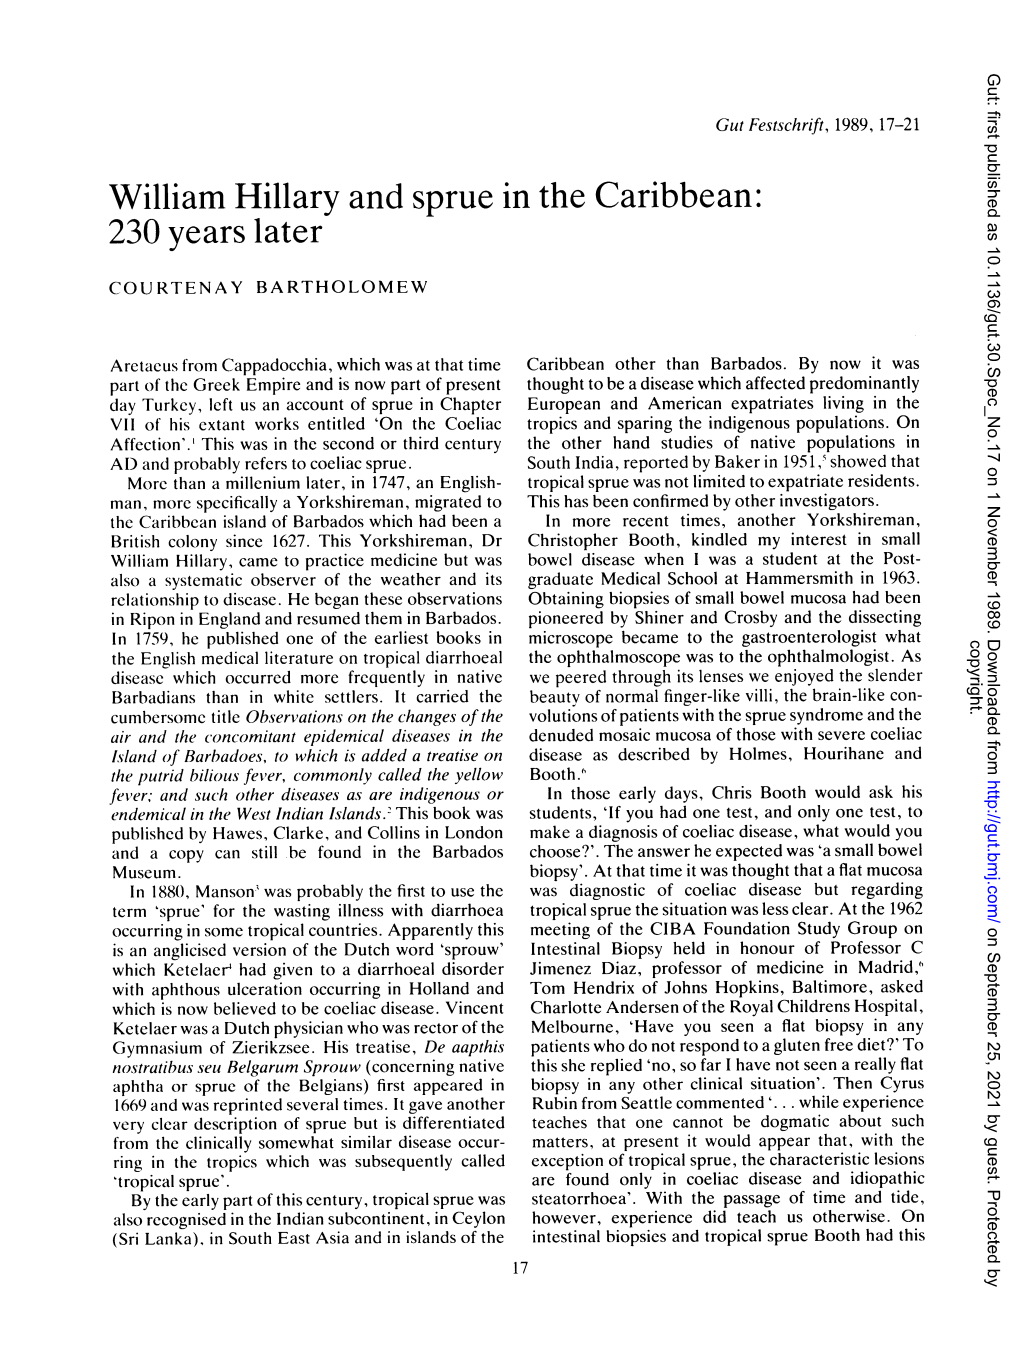 William Hillary and Sprue in the Caribbean: 230 Years Later